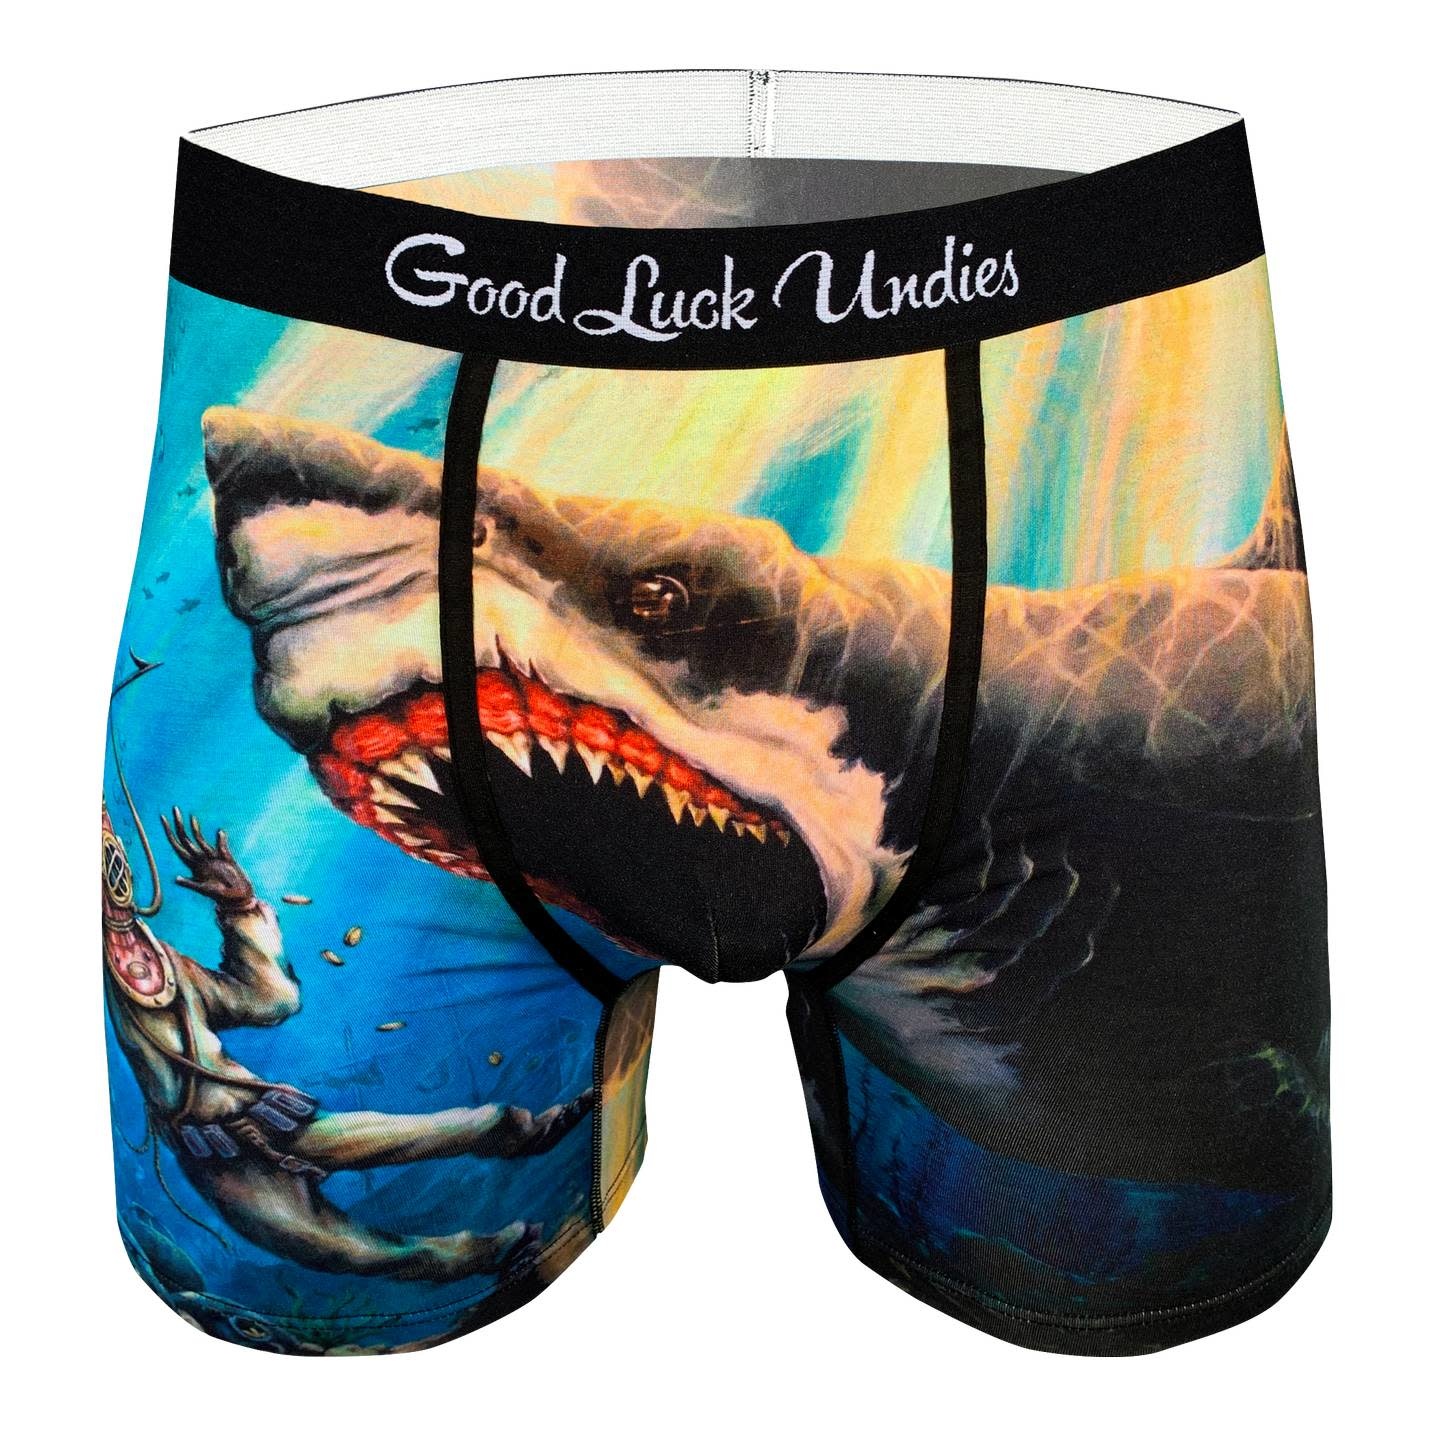 Surfing Sloth Men's Boxer Briefs by Good Luck Undies - The Periwinkle Shoppe